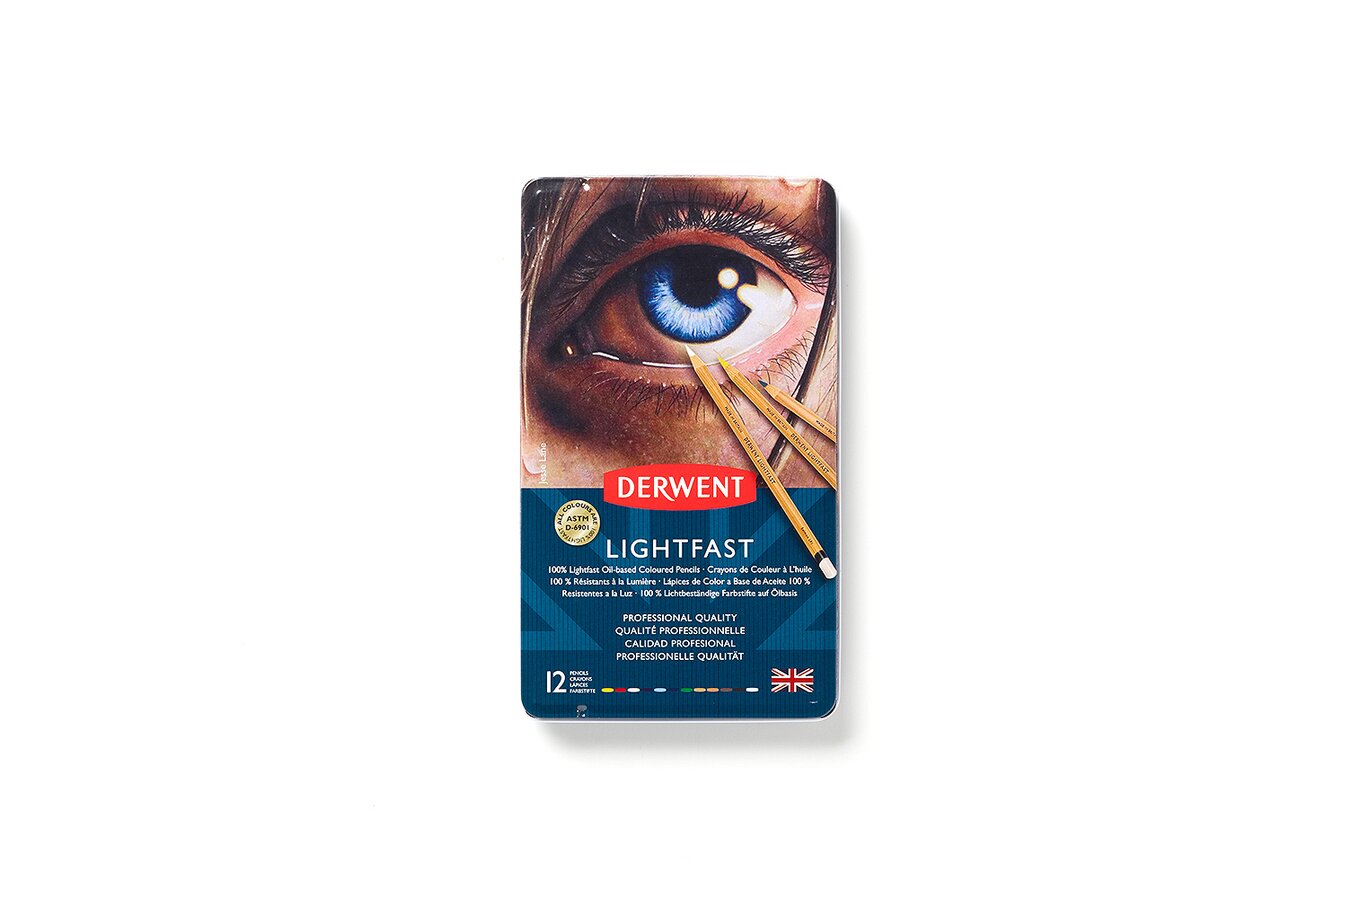 Derwent Lightfast Colored Pencils 36 Tin, Set of 36, 4mm Wide Core, 100%  Lightfast, Oil-based, Premium Core, Creamy, Ideal for Drawing, Coloring